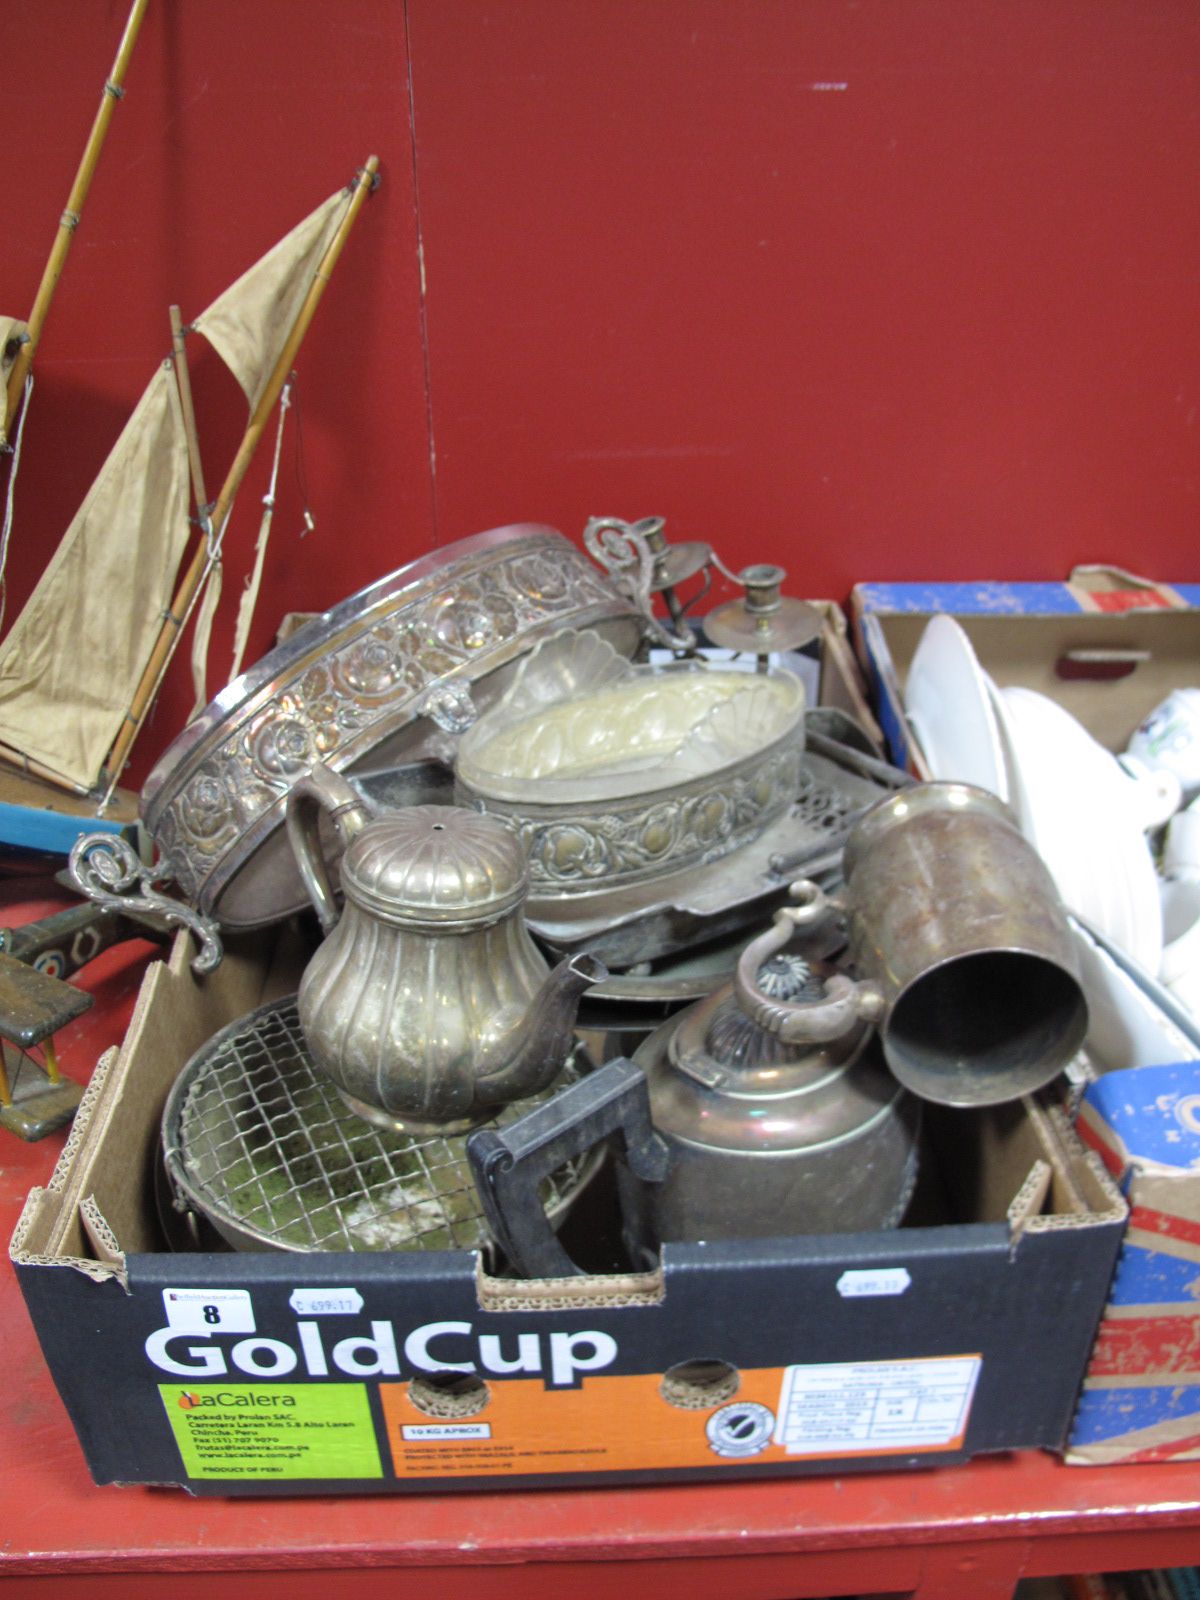 Electroplated Candlesticks, plated baskets, jugs, teapot, rose bowl, condiments, and other plates